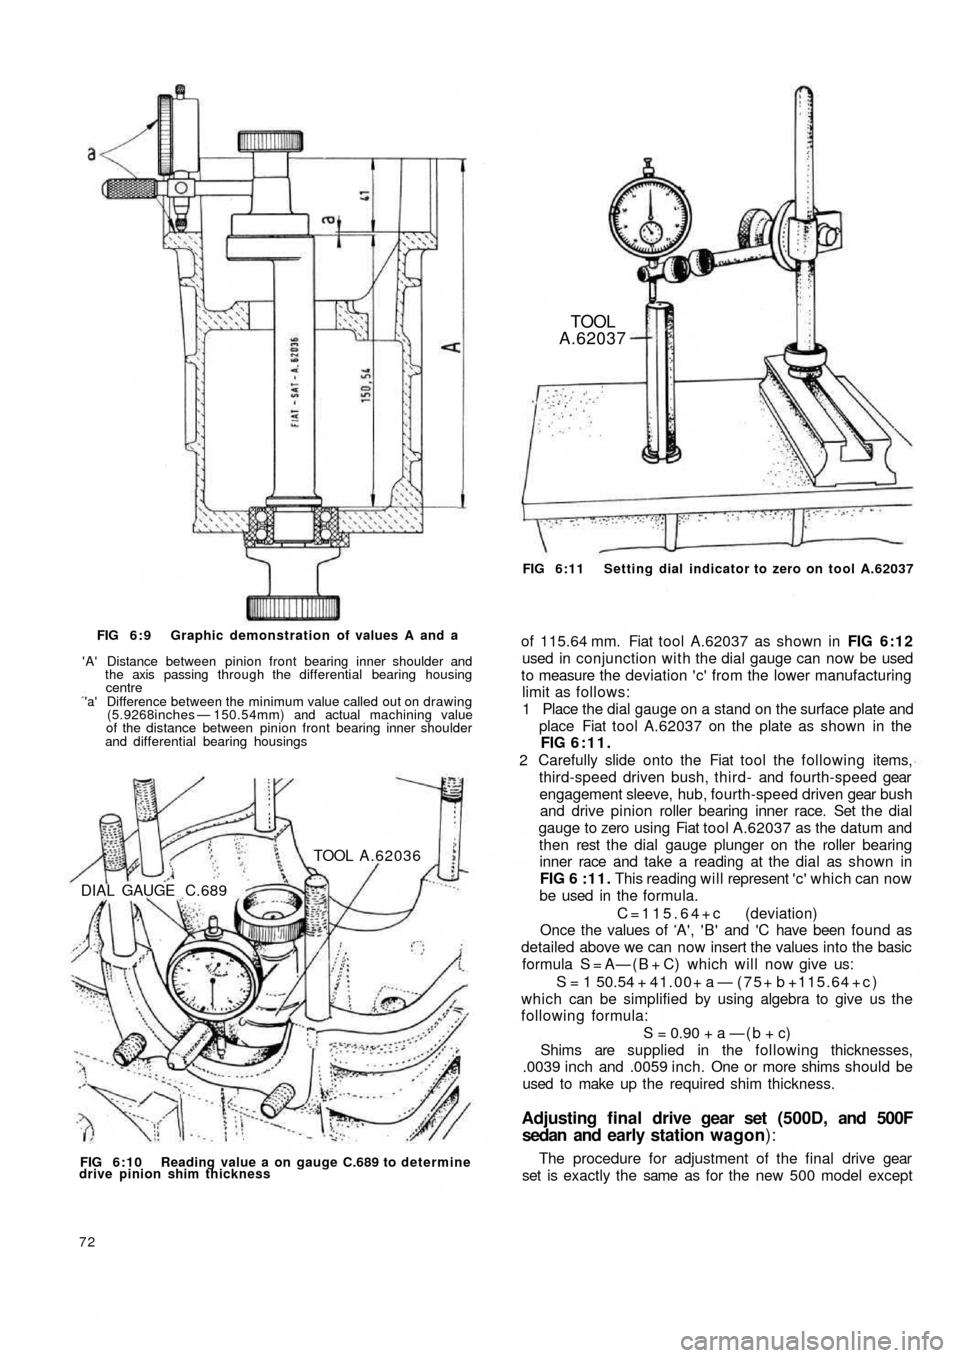 FIAT 500 1964 1.G Repair Manual FIG 6:9  Graphic demonstration of values A and a
A Distance between pinion front bearing inner shoulder and
the axis passing through the differential bearing housing
centrea Difference between the